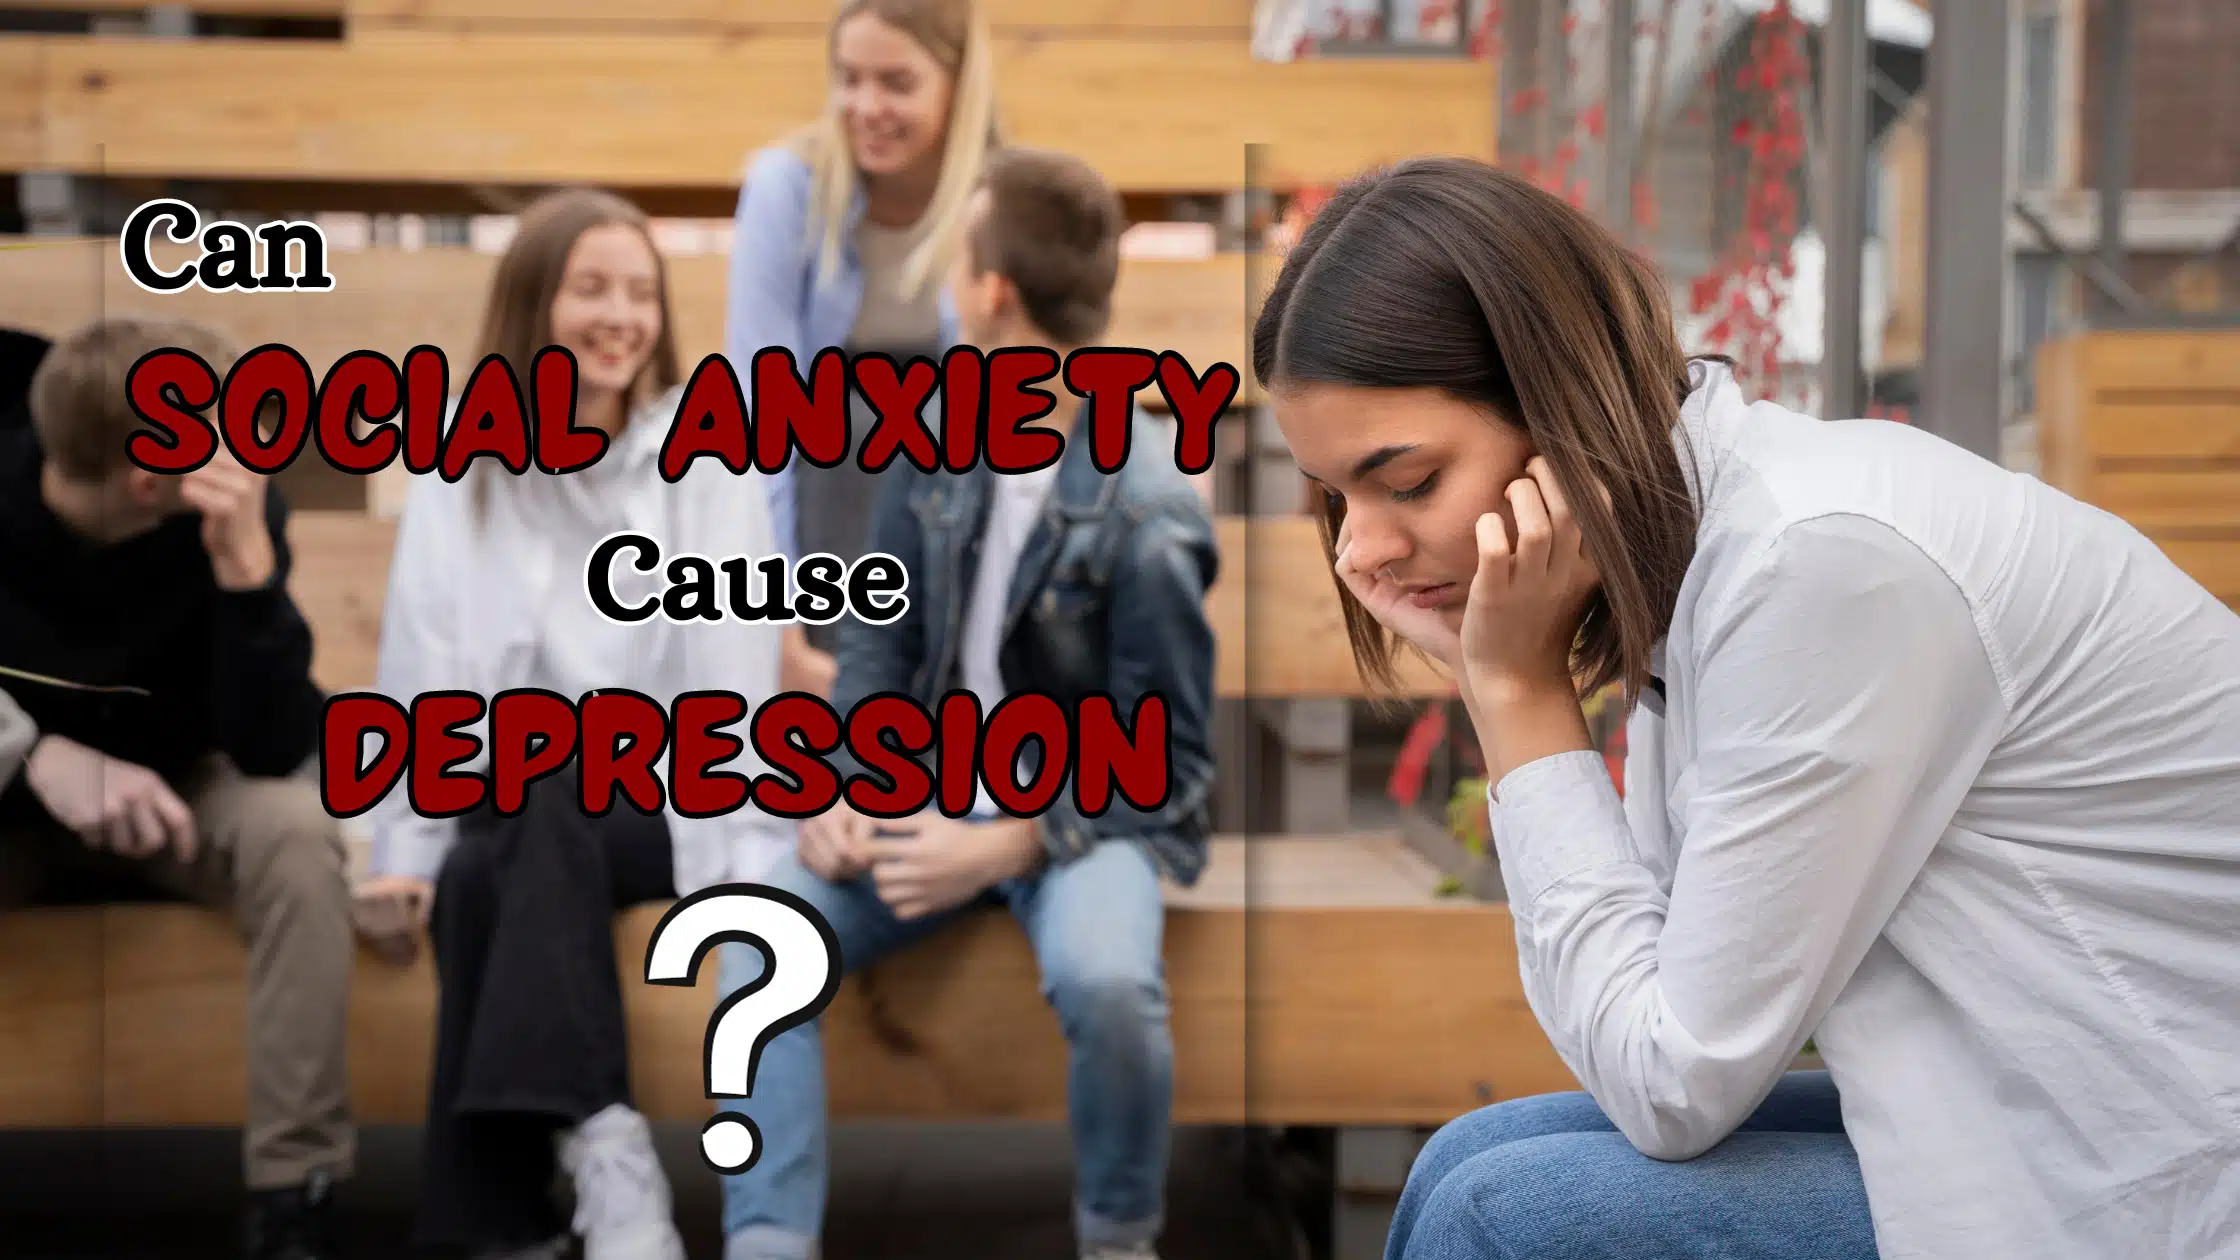 Can social anxiety cause depression